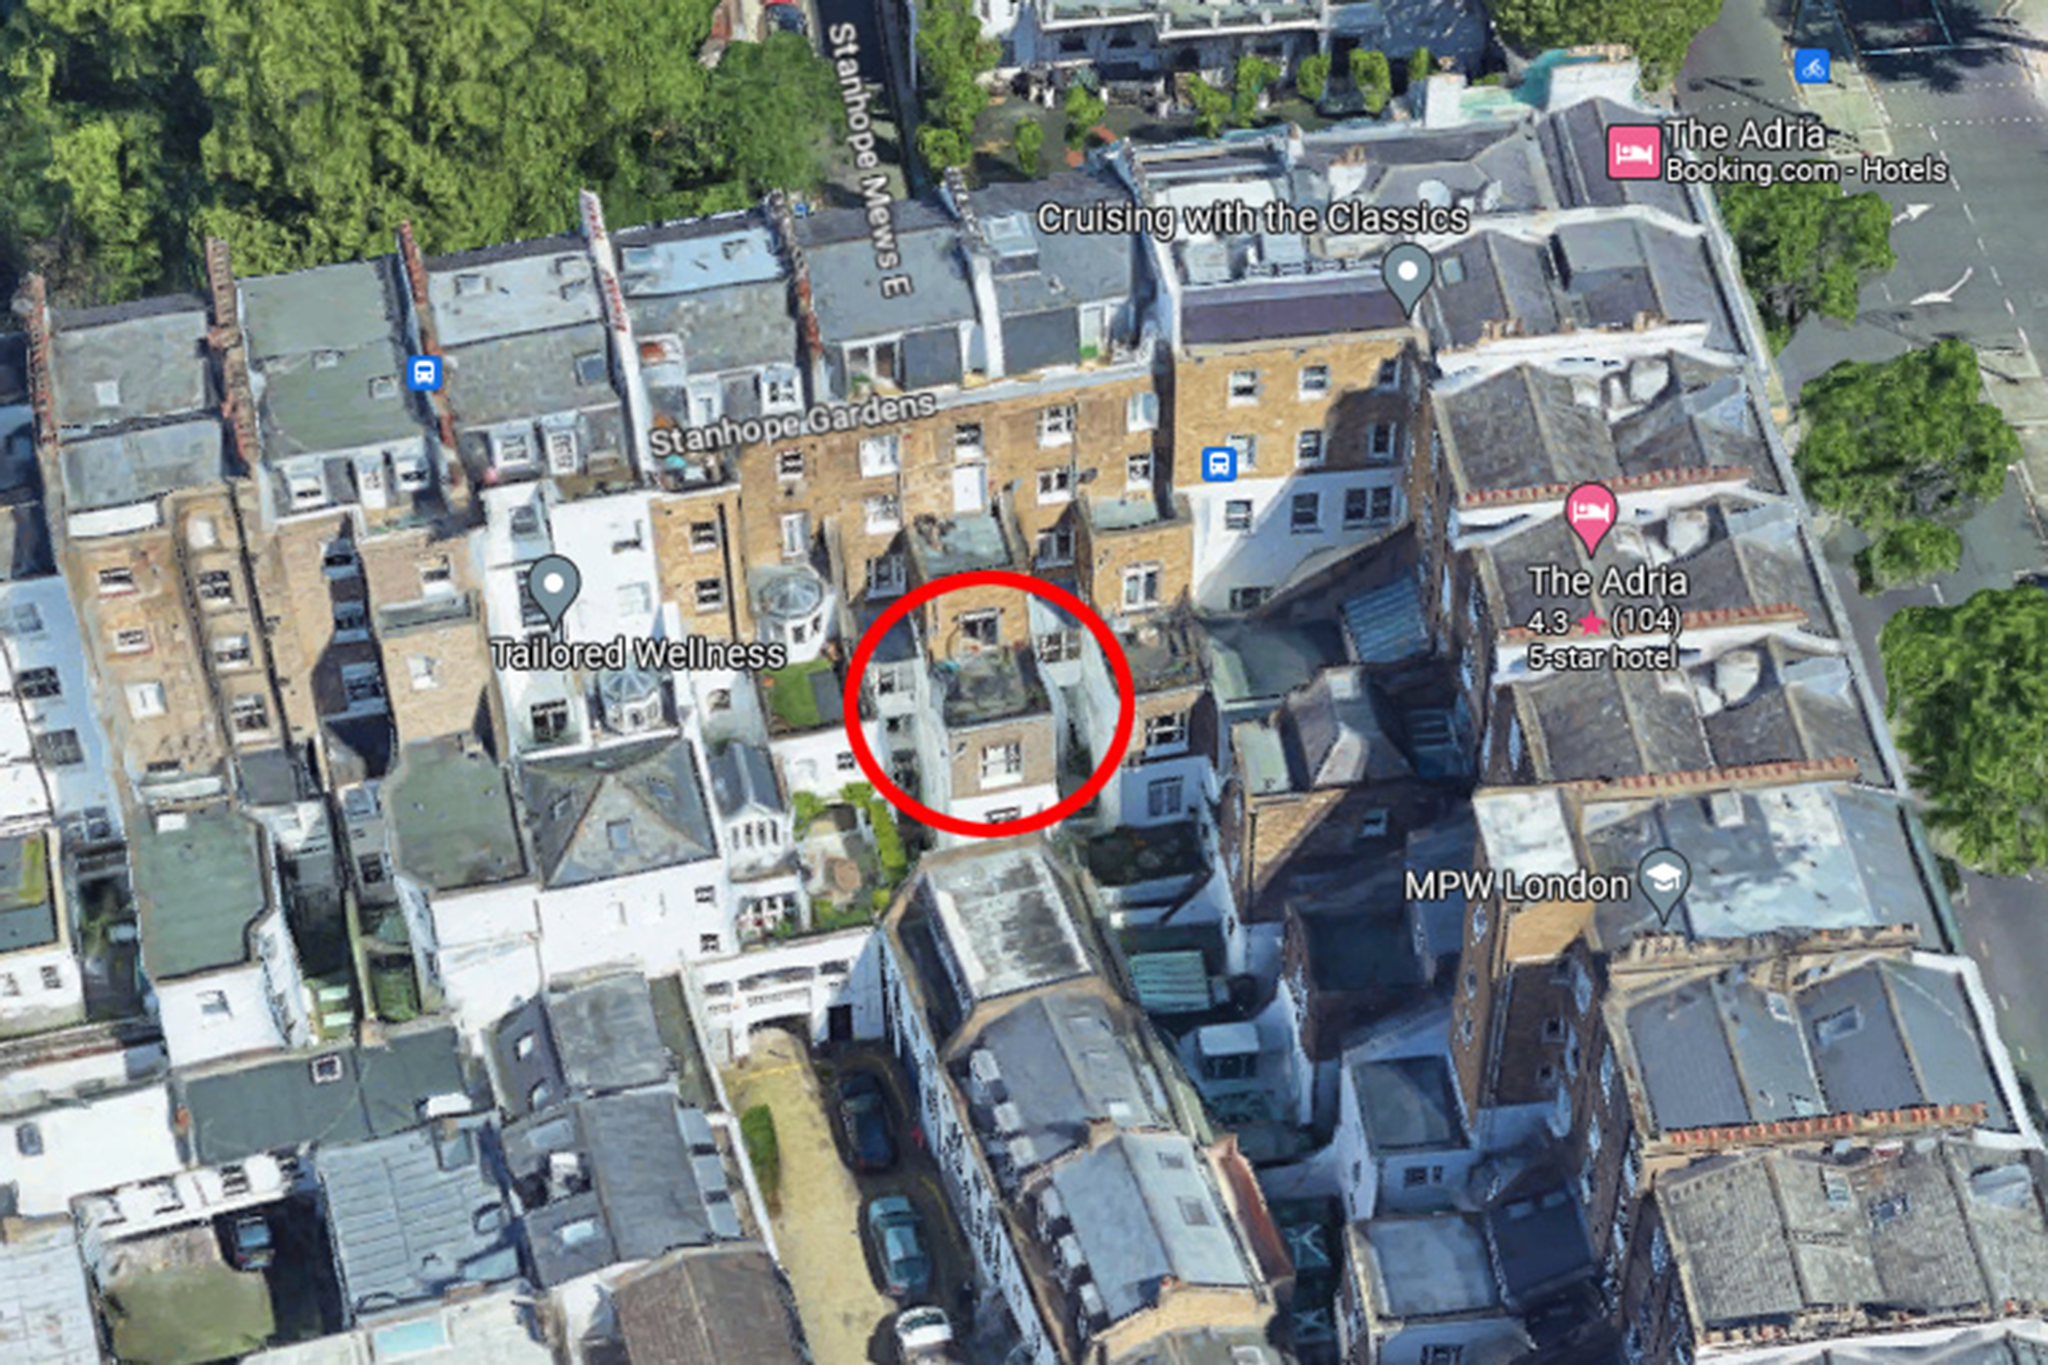 A motorist bought a Kensington terrace for £35,000 to use its parking space